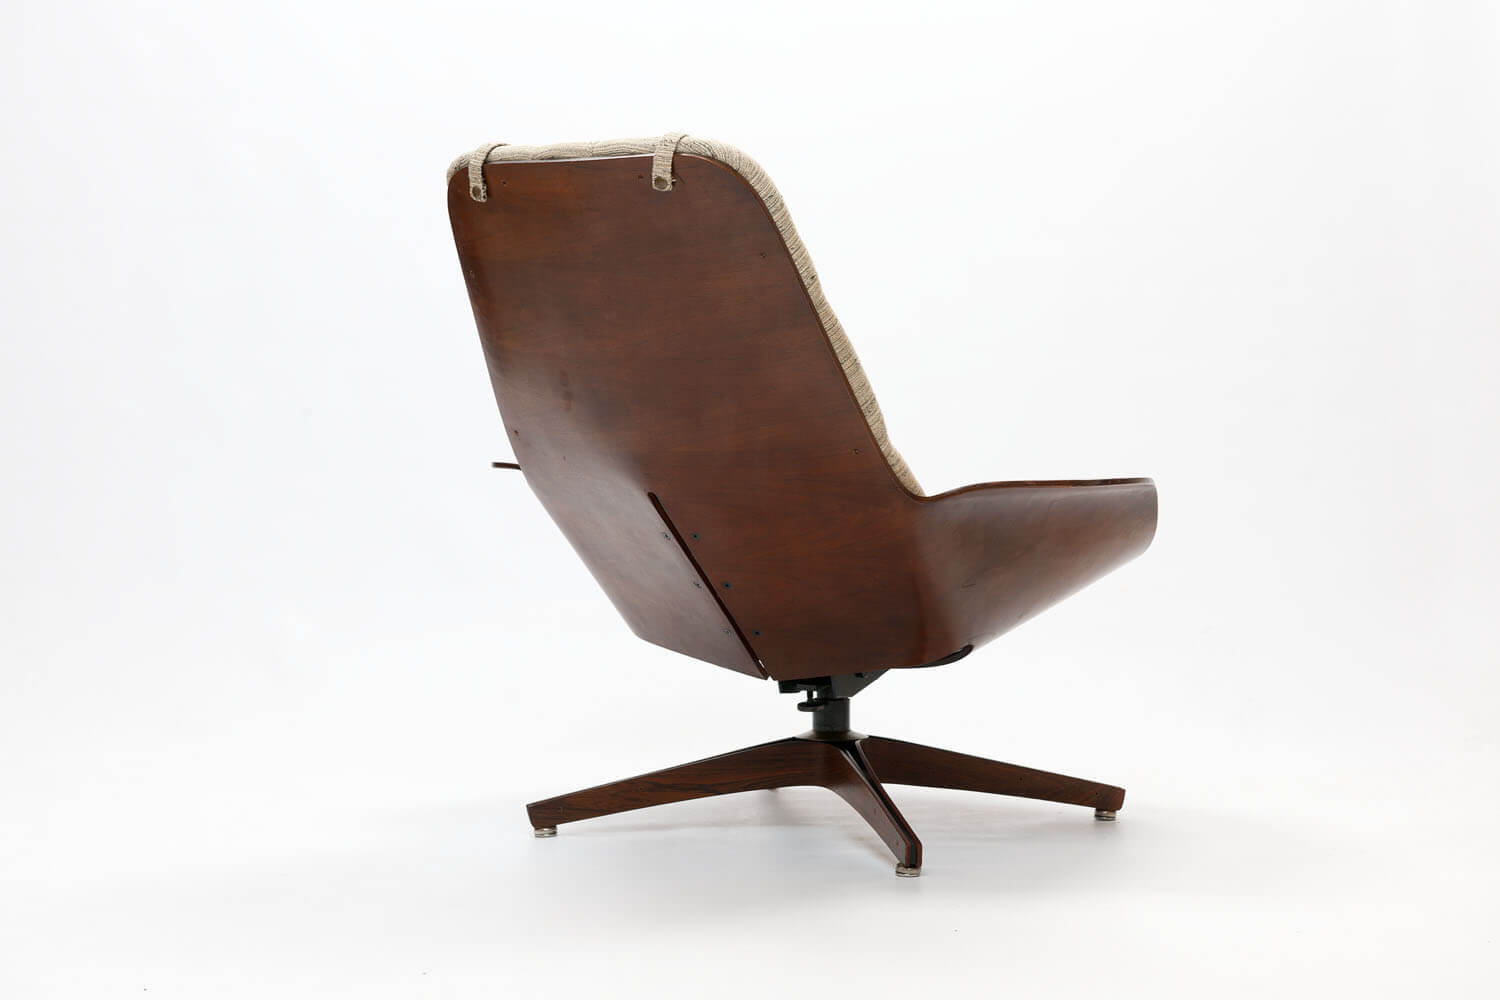 Vintage Plywood ‘Mr. Chair’ & Ottoman Lounge Chair